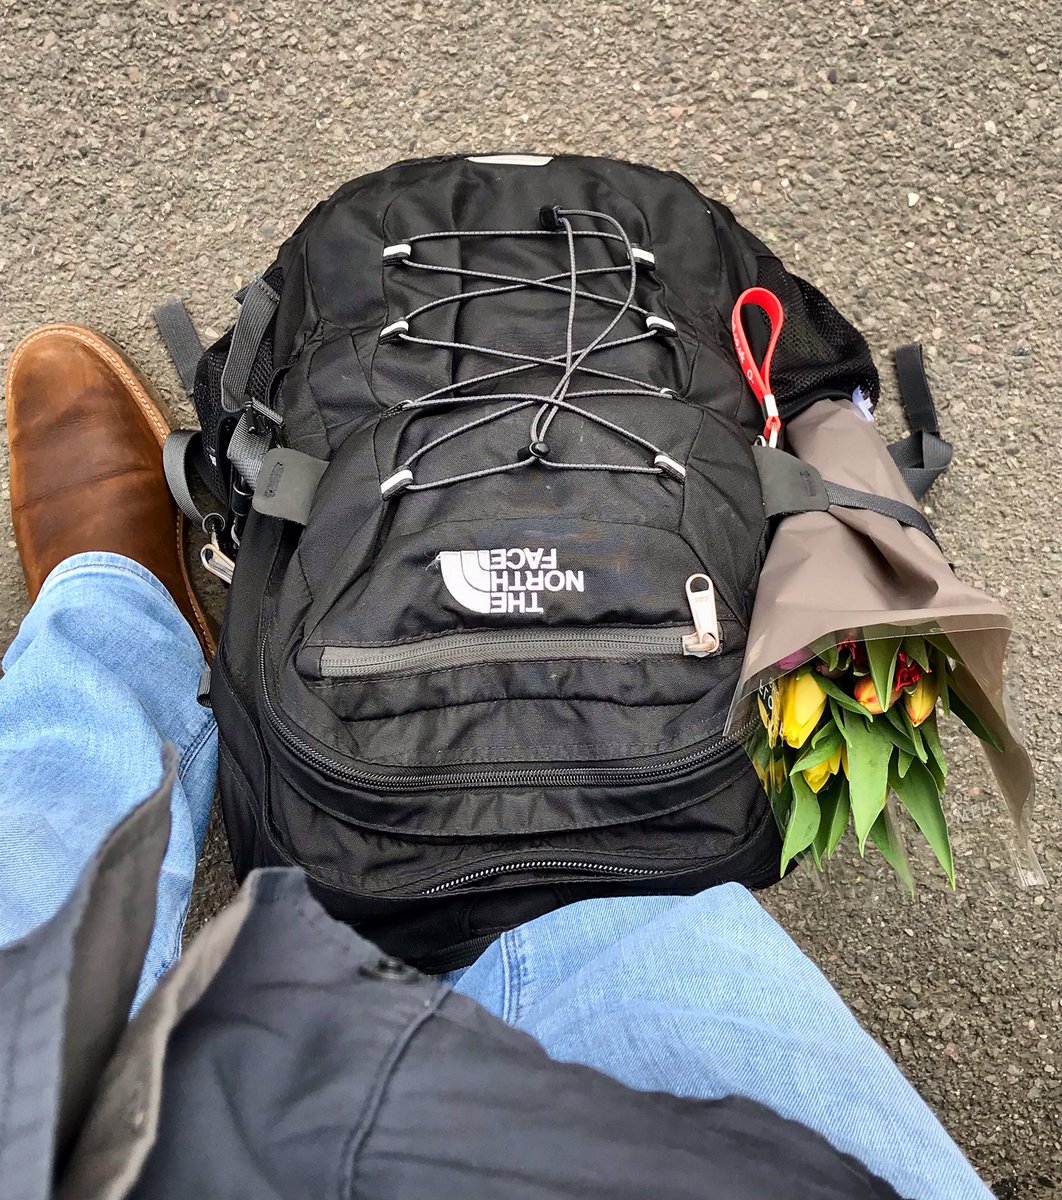 I do like that tulip-carrying feature of my rucksack